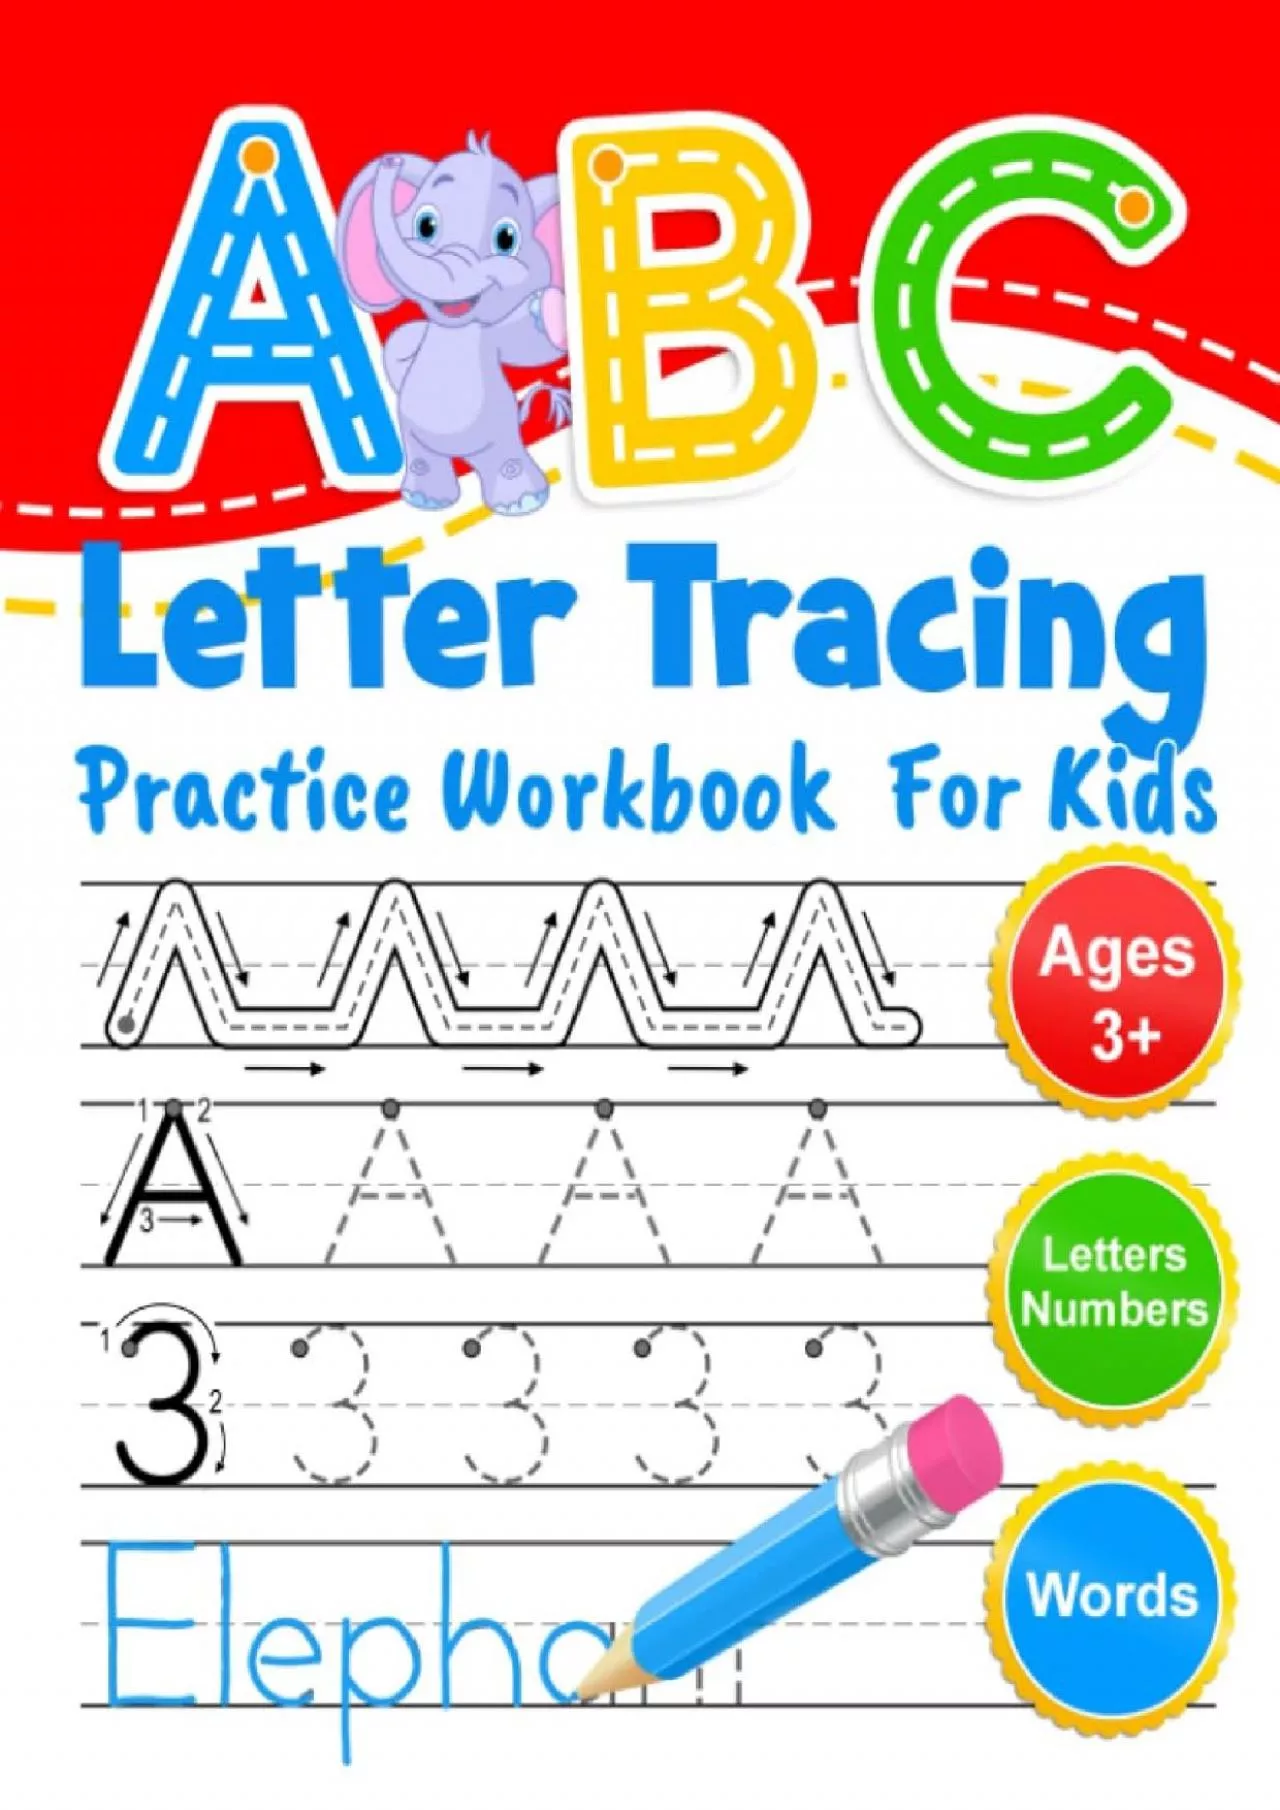 [READ] ABC Letter Tracing Practice Workbook for Kids: Learning To Write Alphabet, Numbers